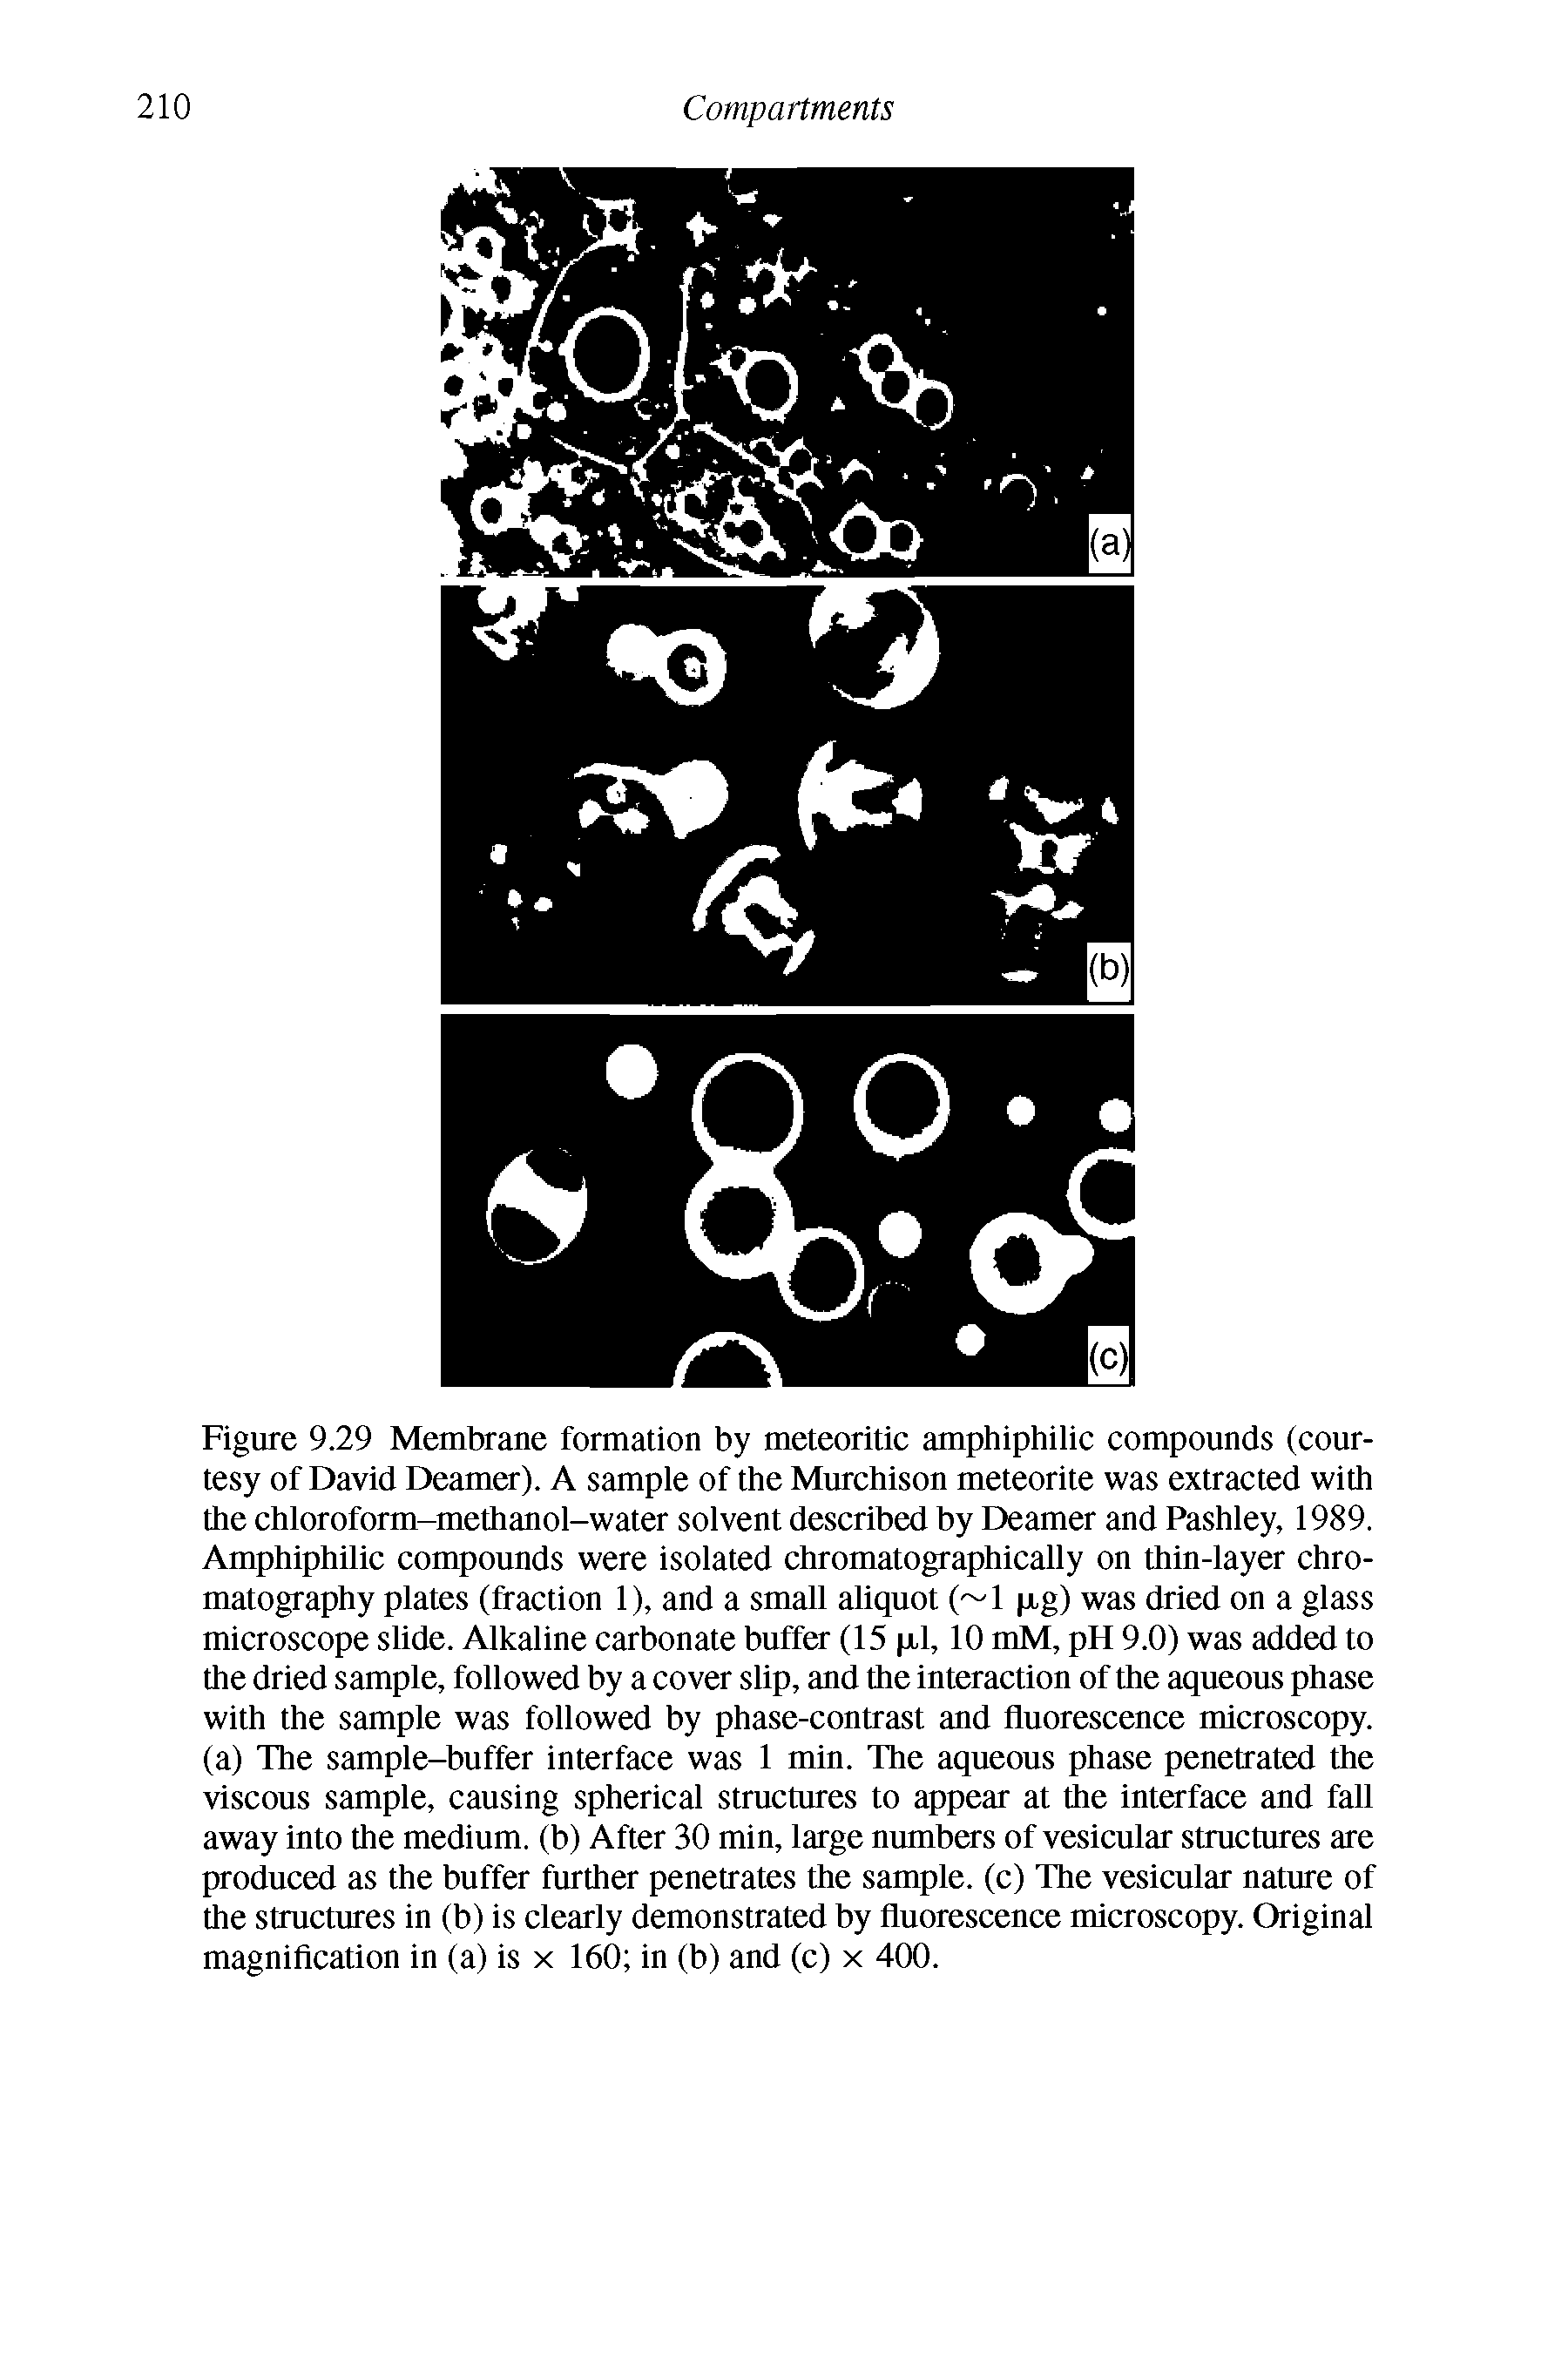 Figure 9.29 Membrane formation by meteoritic amphiphilic compounds (courtesy of David Deamer). A sample of the Murchison meteorite was extracted with the chloroform-methanol-water solvent described by Deamer and Pashley, 1989. Amphiphilic compounds were isolated chromatographically on thin-layer chromatography plates (fraction 1), and a small aliquot ( 1 p,g) was dried on a glass microscope slide. Alkaline carbonate buffer (15 p,l, 10 mM, pH 9.0) was added to the dried sample, followed by a cover slip, and the interaction of the aqueous phase with the sample was followed by phase-contrast and fluorescence microscopy, (a) The sample-buffer interface was 1 min. The aqueous phase penetrated the viscous sample, causing spherical structures to appear at the interface and fall away into the medium, (b) After 30 min, large numbers of vesicular structures are produced as the buffer further penetrates the sample, (c) The vesicular nature of the structures in (b) is clearly demonstrated by fluorescence microscopy. Original magnification in (a) is x 160 in (b) and (c) x 400.